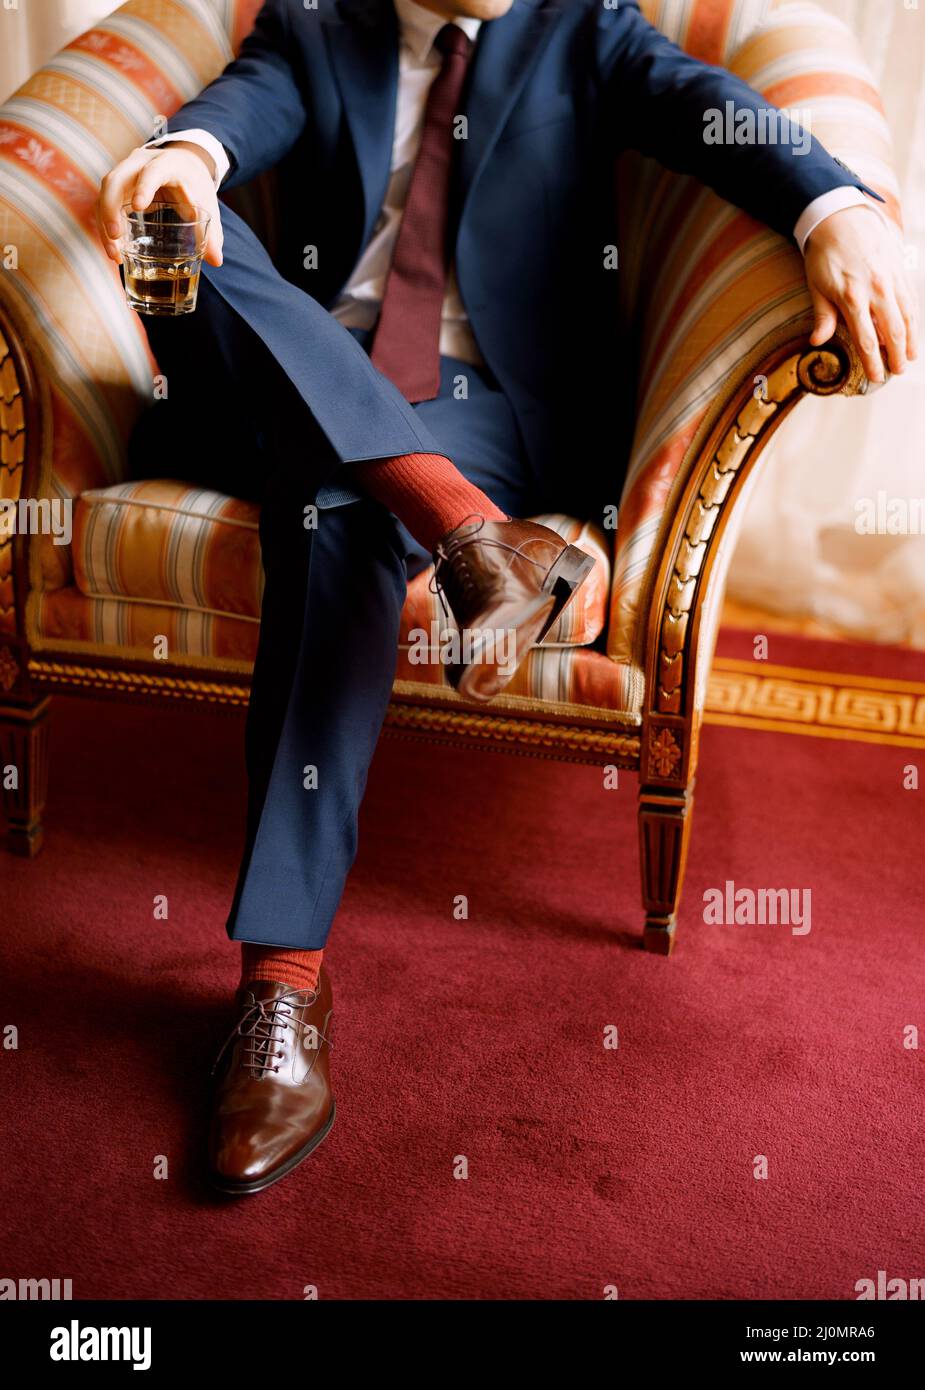 Legs of a man in blue pants, red socks and brown shoes sitting in the chair holding glass in one hand Stock Photo